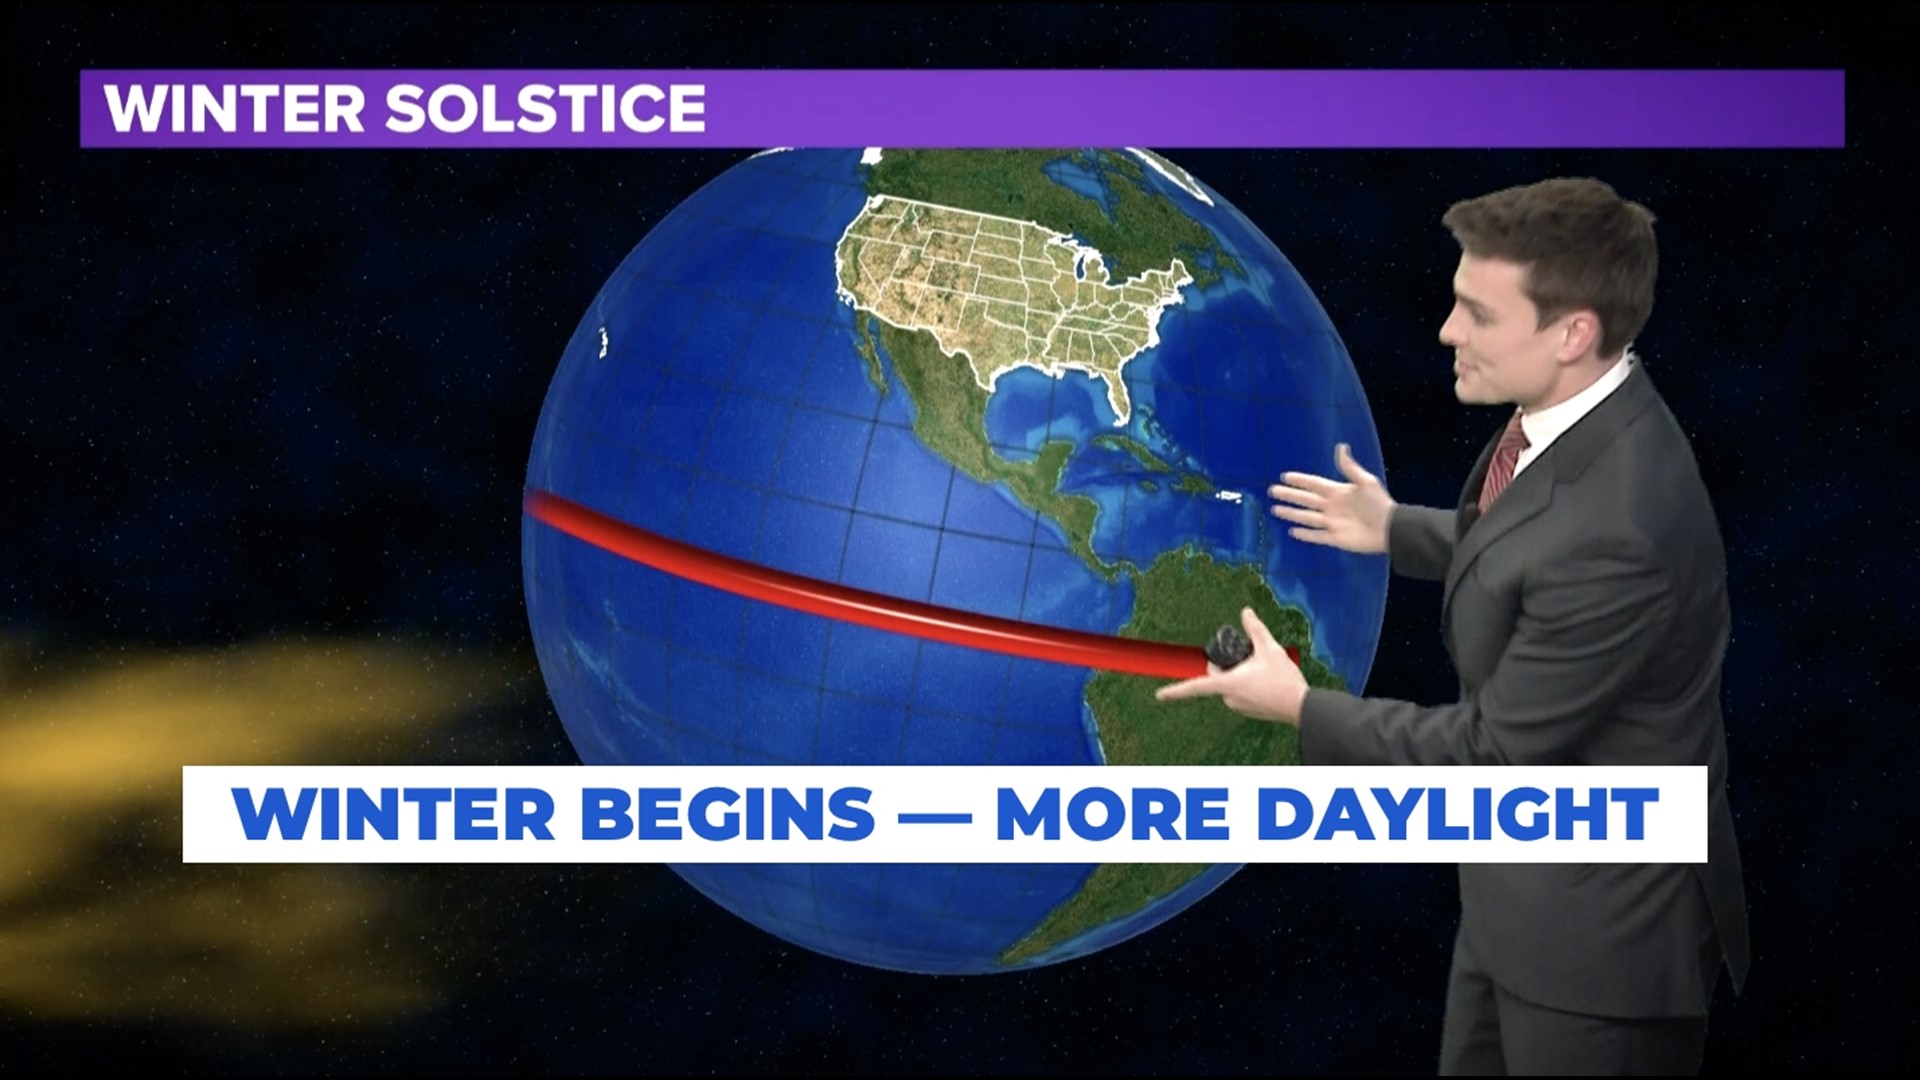 The winter solstice (Dec 21st, 2021) marks the official start of winter in the northern hemisphere. It also marks the day the U.S. starts gaining daylight again.